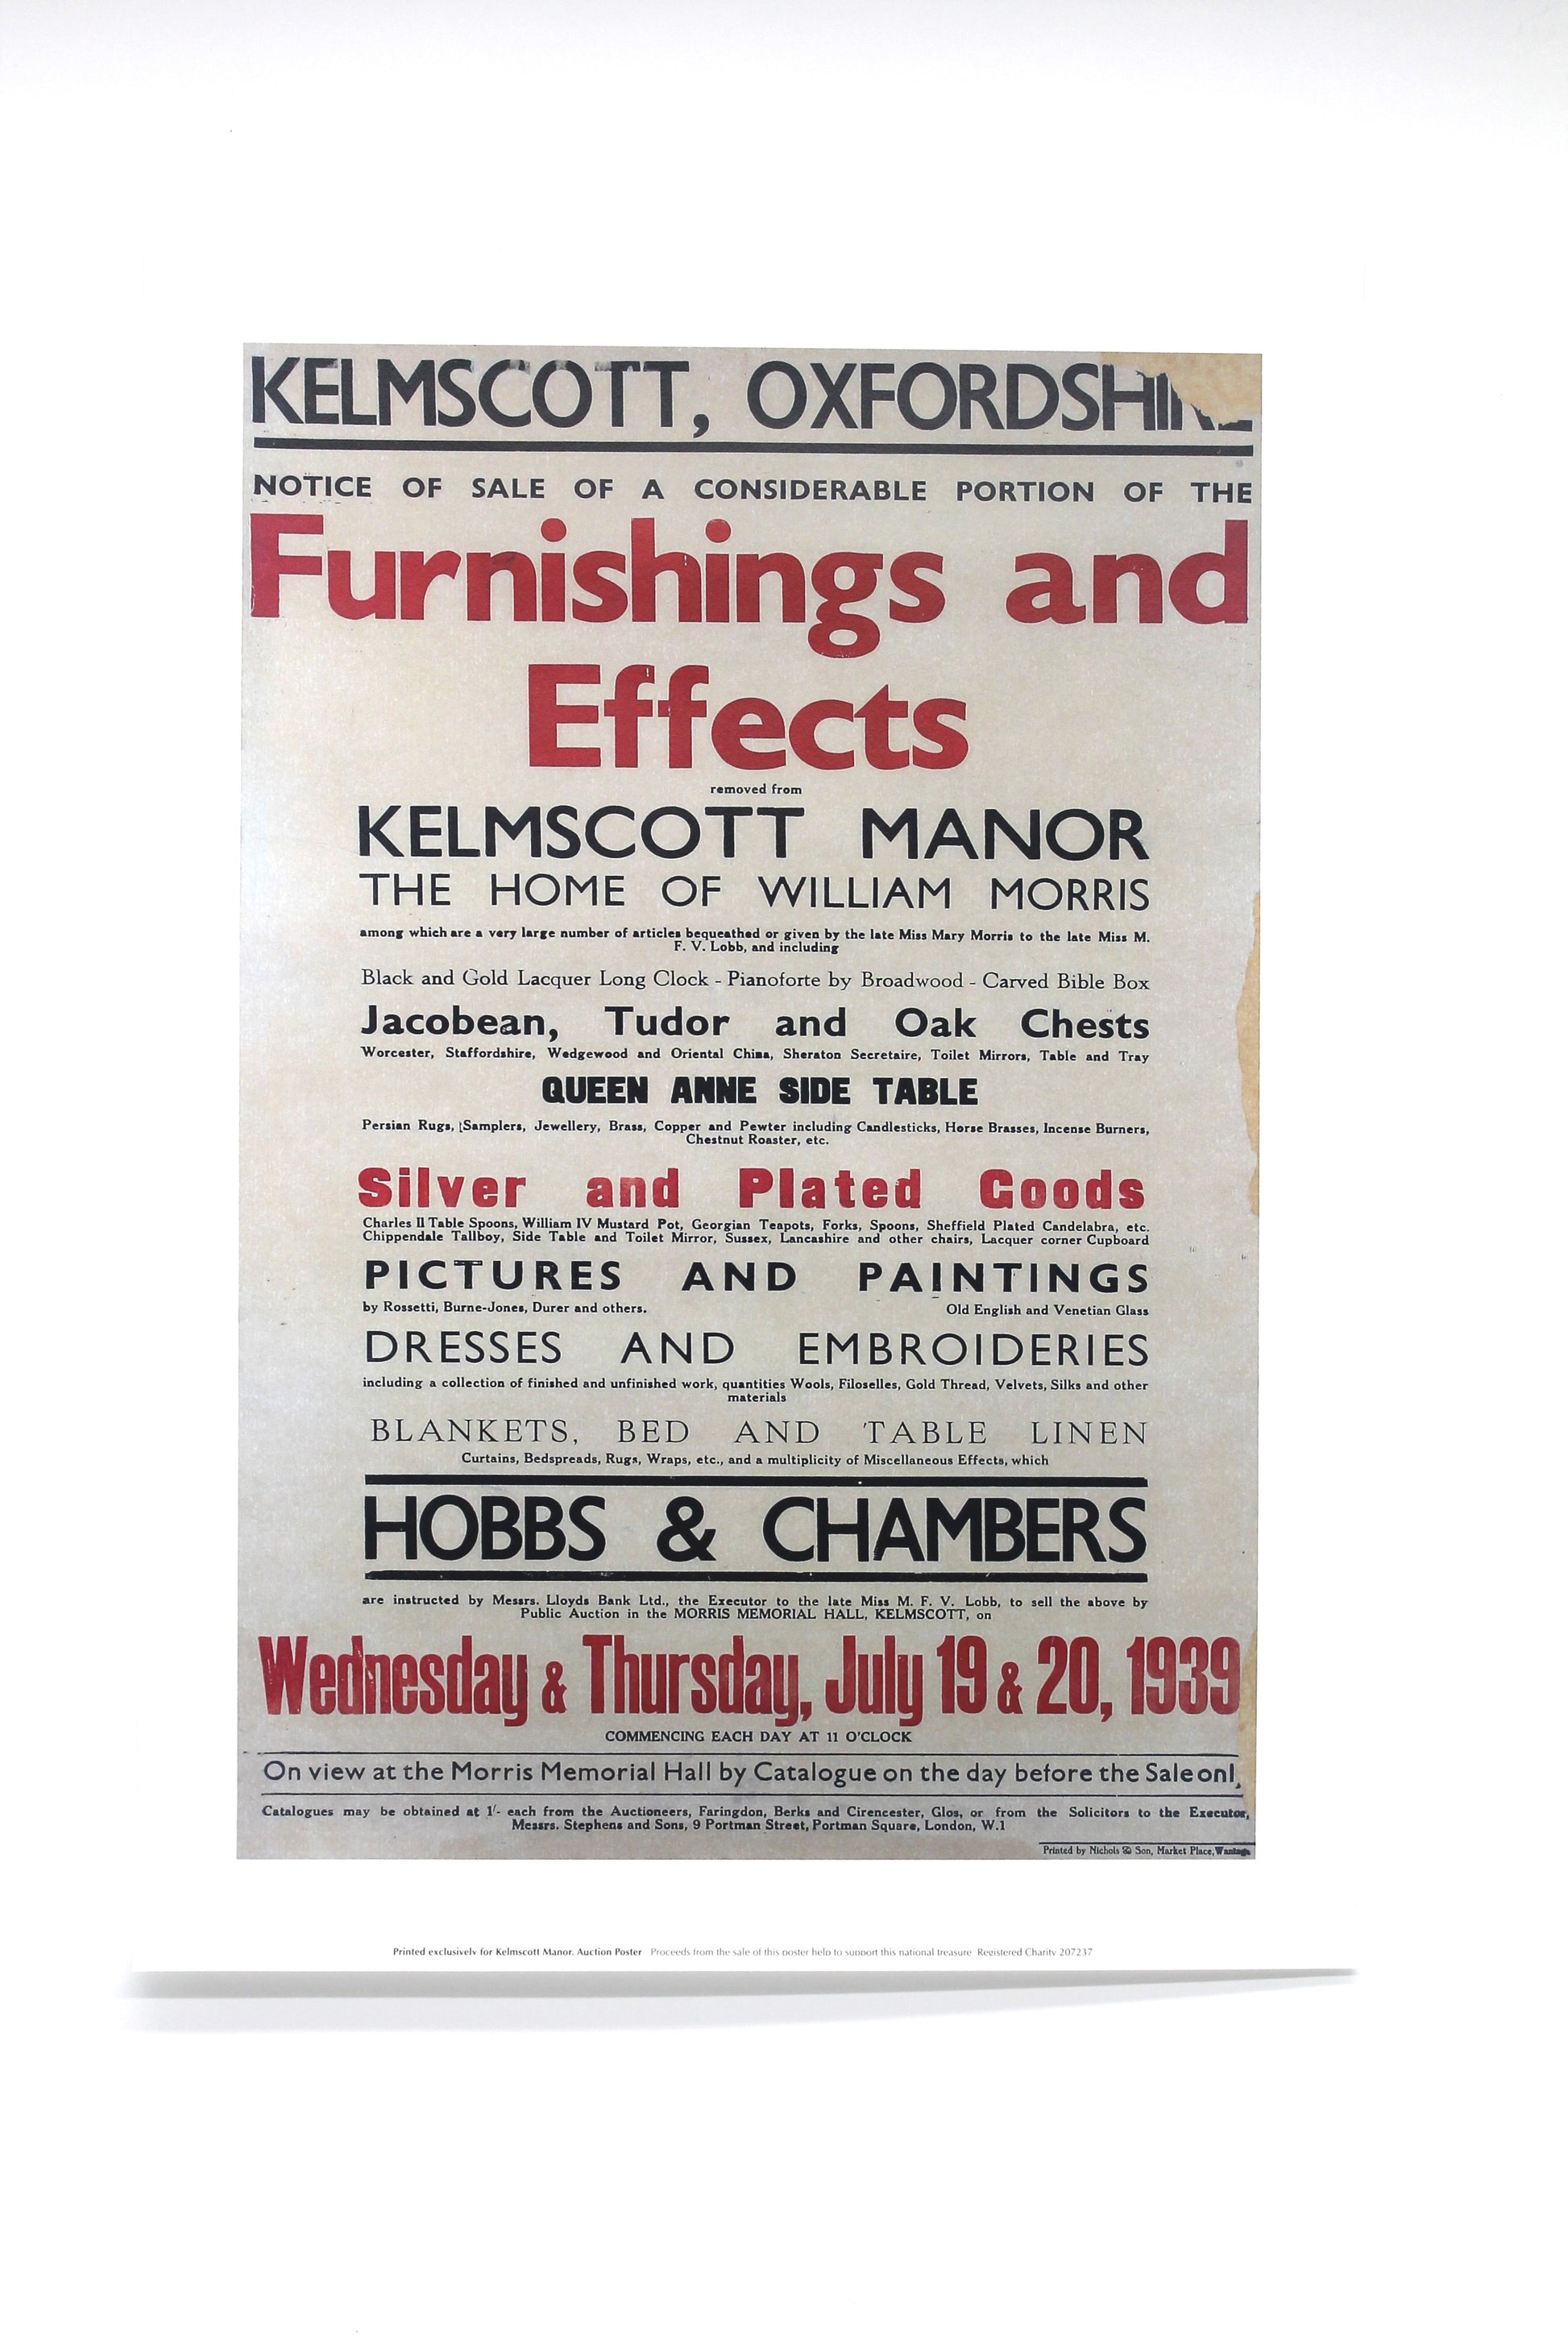 1939 auction poster